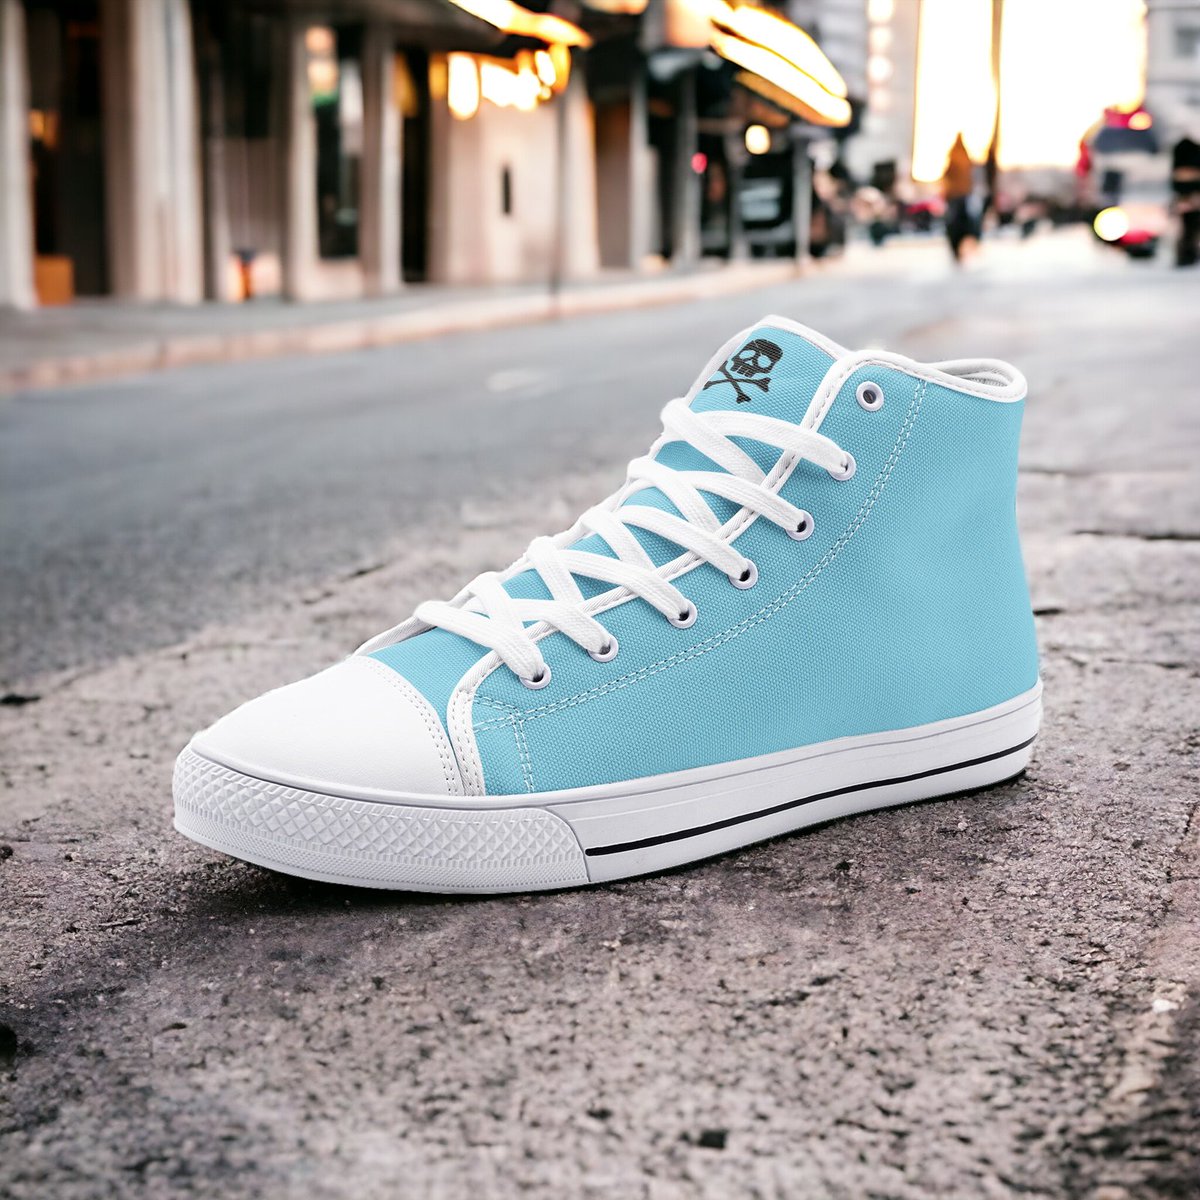 💙 Dive into Serenity: Stride Effortlessly with Our Clean Blue High-Top Canvas Shoes! 👟✨

#CleanBlueShoes #SerenityStrides #StandOutFootwear #CanvasShoes #BlueShoes #HighTop #CleanShoes #FashionFootwear #BlueCanvas #StylishSneakers #CanvasSneakers #ClassicBlue #FootwearFashion